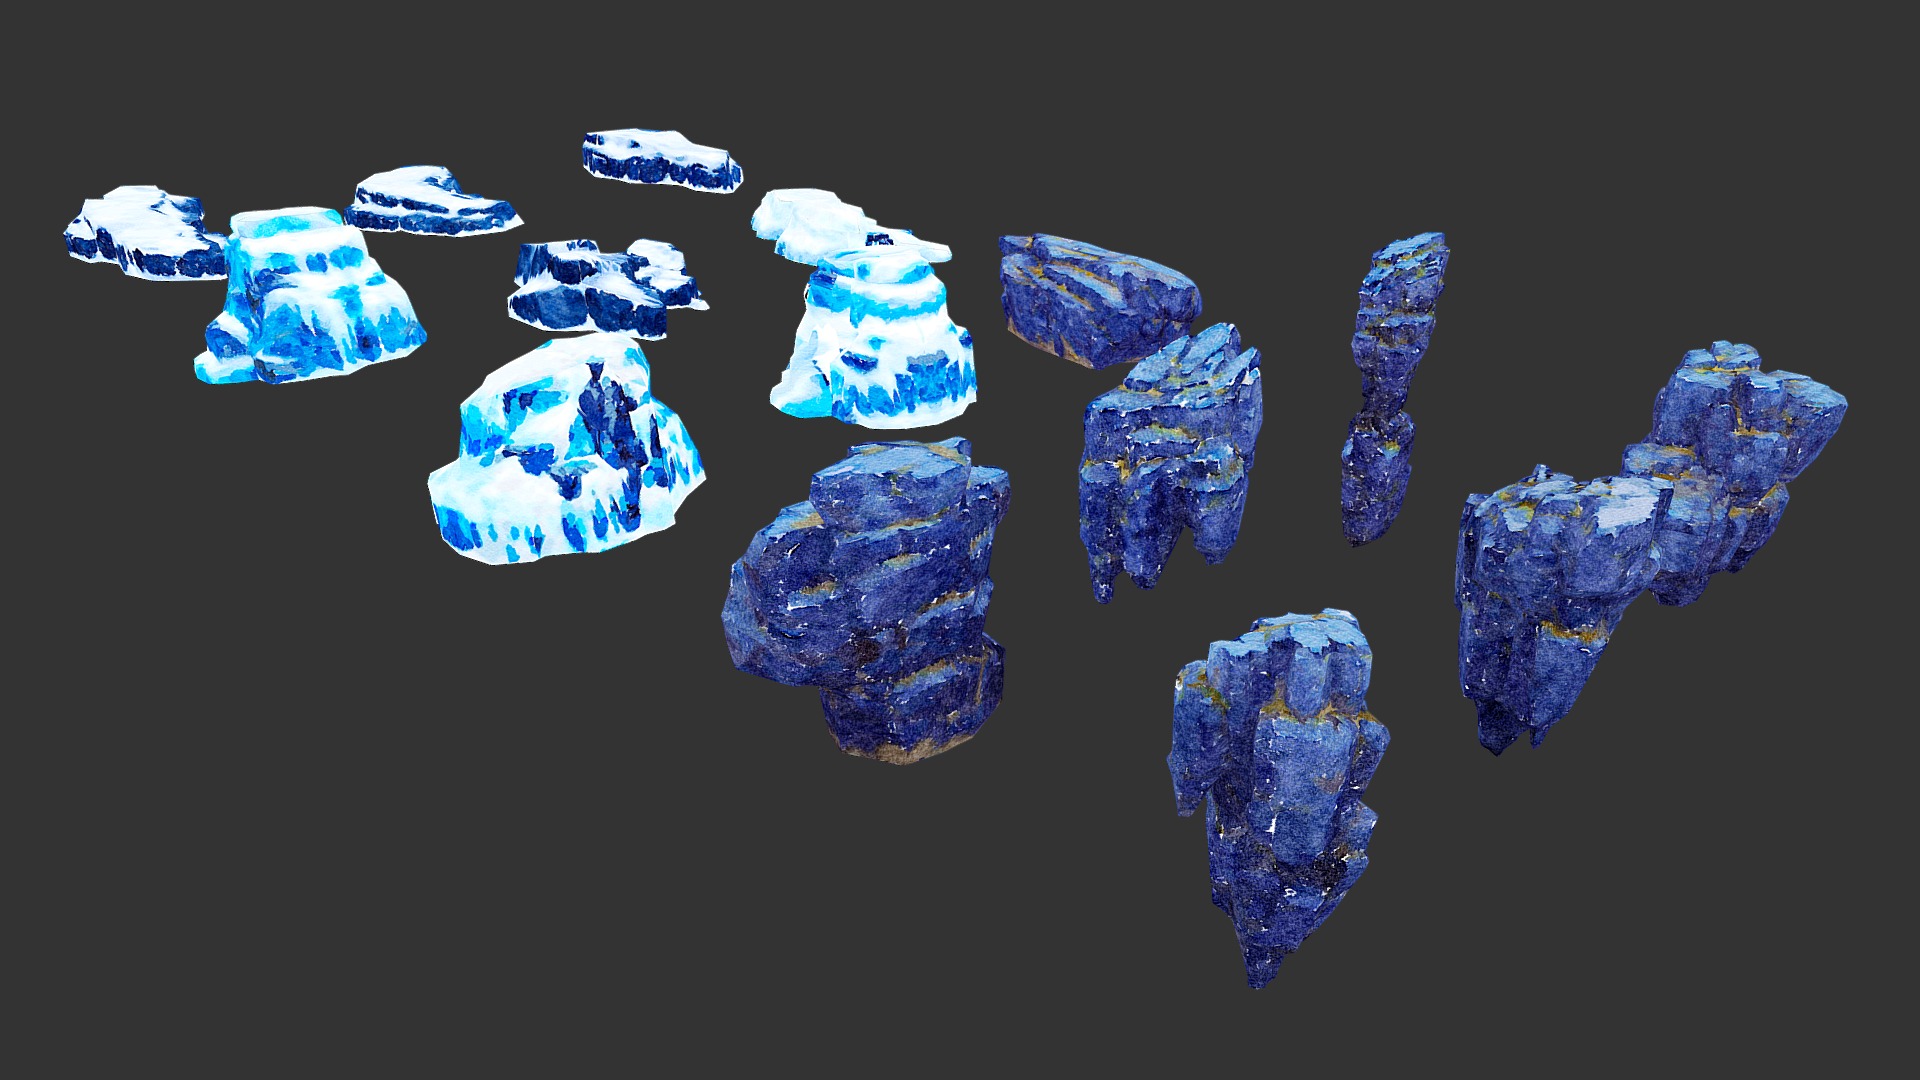 A package of low polygonal Rocks.The package contains 15 objects

Rock 1: 797 Poly, 648 Vert
Rock 2: 487 Poly, 372 Vert
Rock 3: 364 Poly, 310 Vert
Rock 4: 204 Poly, 197 Vert
Rock 5: 86 Poly, 76 Vert
Rock 6: 98 Poly, 84 Vert
Rock 7: 168 Poly, 136 Vert
Rock 8: 376 Poly, 330 Vert
Rock 9: 398 Poly, 321 Vert
Rock 10: 684 Poly, 513 Vert
Rock 11: 806 Poly, 638 Vert
Rock 12: 328 Poly, 253 Vert
Rock 13: 228 Poly, 207 Vert
Rock 14: 310 Poly, 265 Vert
Rock 15: 88 Poly, 82 Vert




Only Textures Diffus duplicated in resolution 1024 x 1024, 1024 x 512, 512 x 1024. Format textures of PNG. Files include: 3Dsmax, 3Ds, Obj, Fbx and folder with textures. Ready import to game project (Unity, Unreal)
If there is a need for any type of model, send a message! We will provide. 
Thanks for your interest and love! 



Note: Watercolor style illustrations 
It is recommended to use flat lighting or shaderless material - Low Poly Stone Illustration Collection Part 7 - 3D model by josluat91 3d model